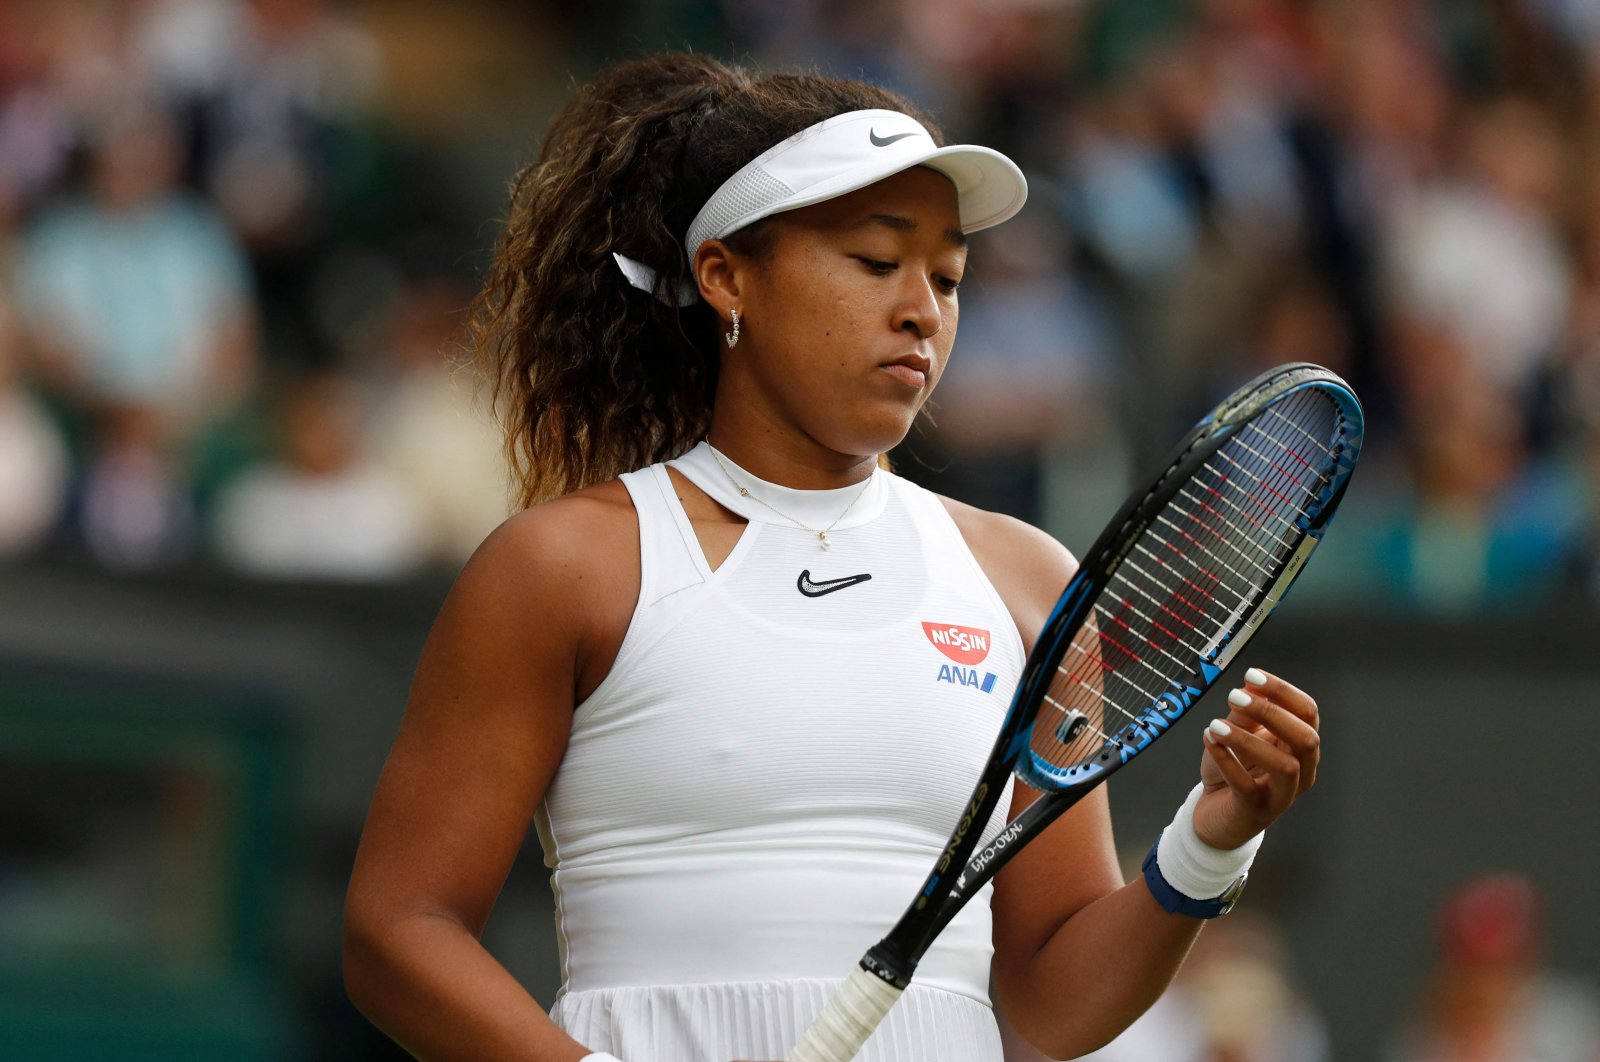 Japan's Naomi Osaka reacts after a point against Kazakhstan's Yulia Putintseva during their women's singles first round match on the first day of the 2019 Wimbledon Championships at The All England Lawn Tennis Club in Wimbledon, southwest London, July 1, 2019. (AFP Photo)